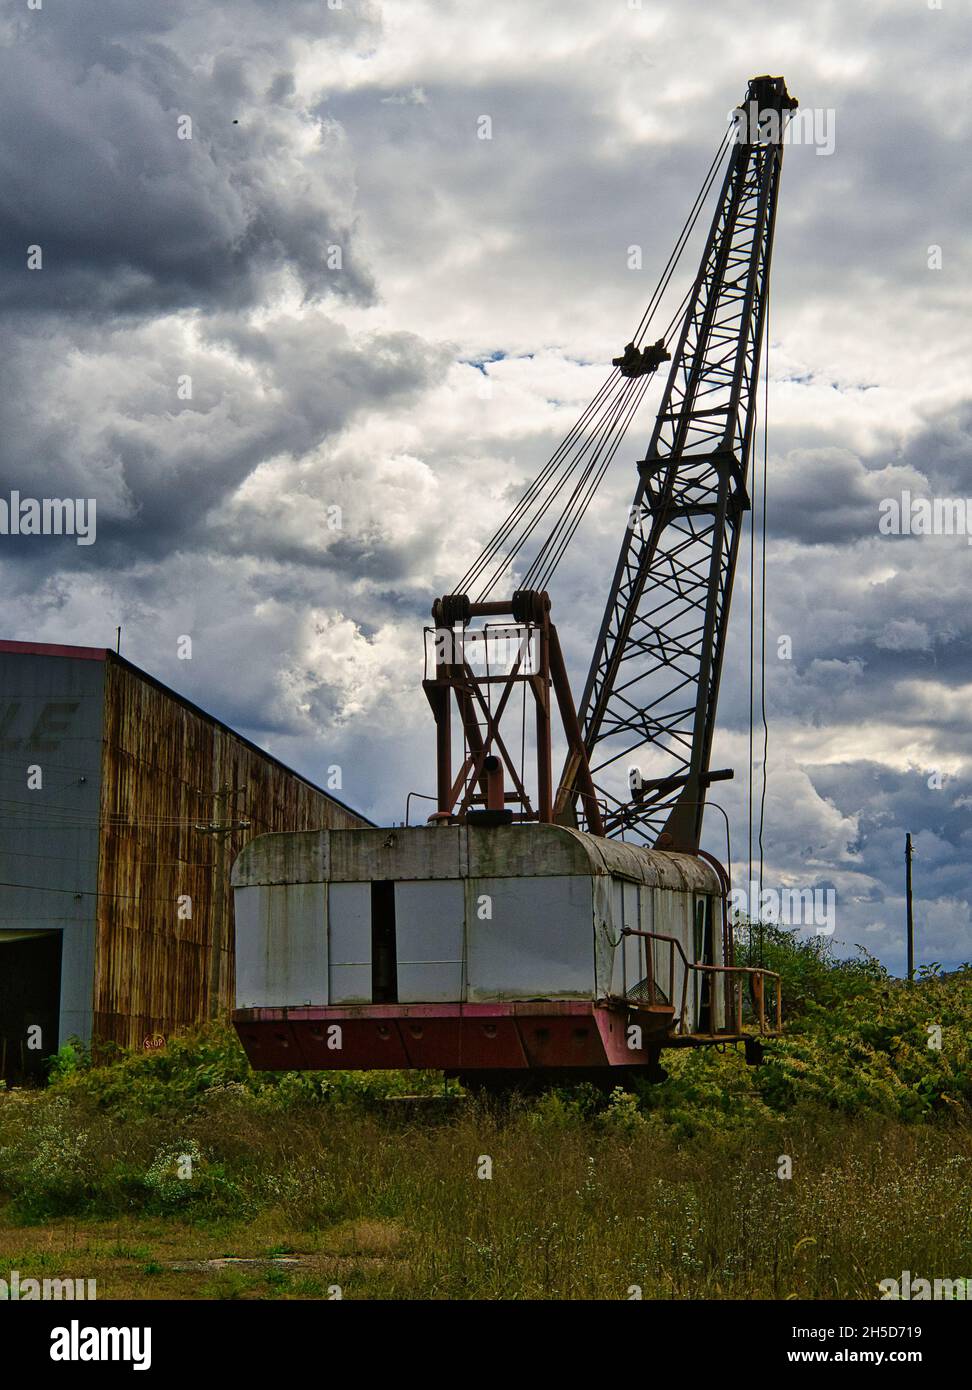 An Old mobile crawler crane with a stormy sky background. Stock Photo